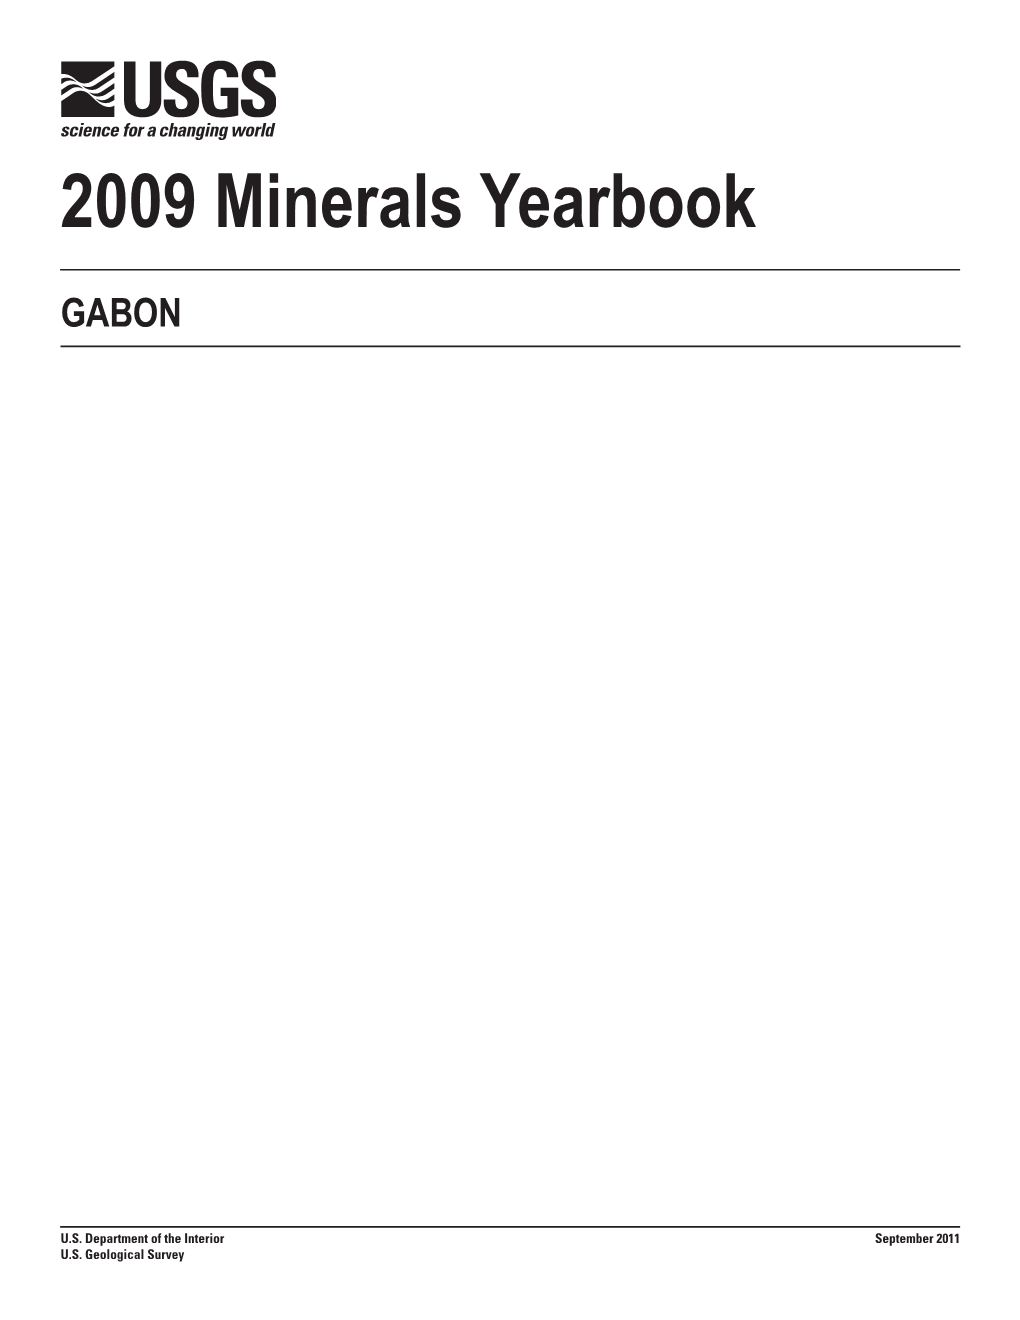 The Mineral Industry of Gabon in 2009